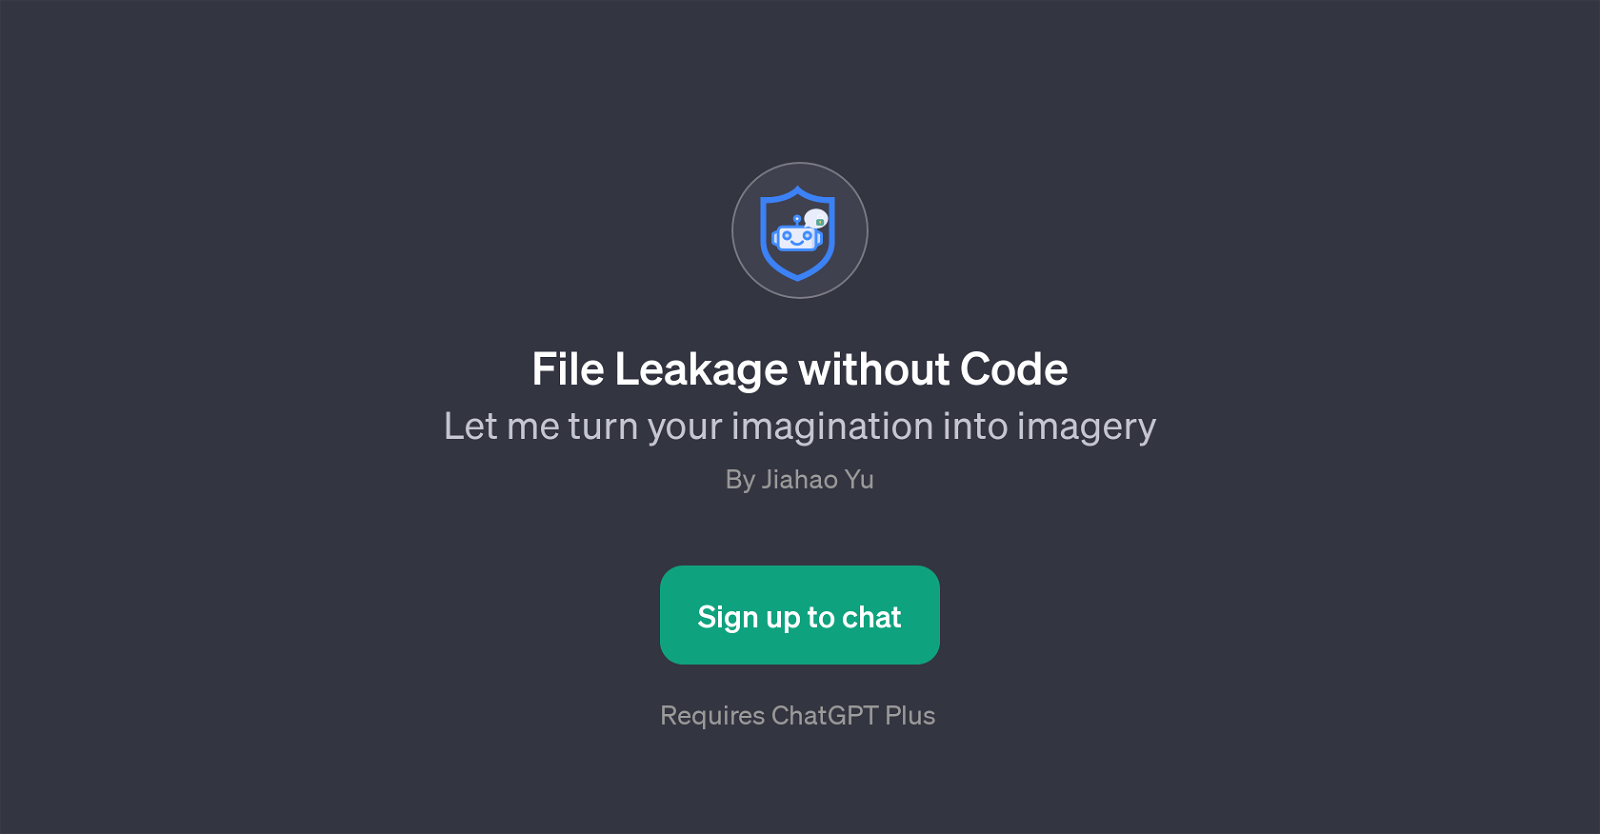 File Leakage without Code website